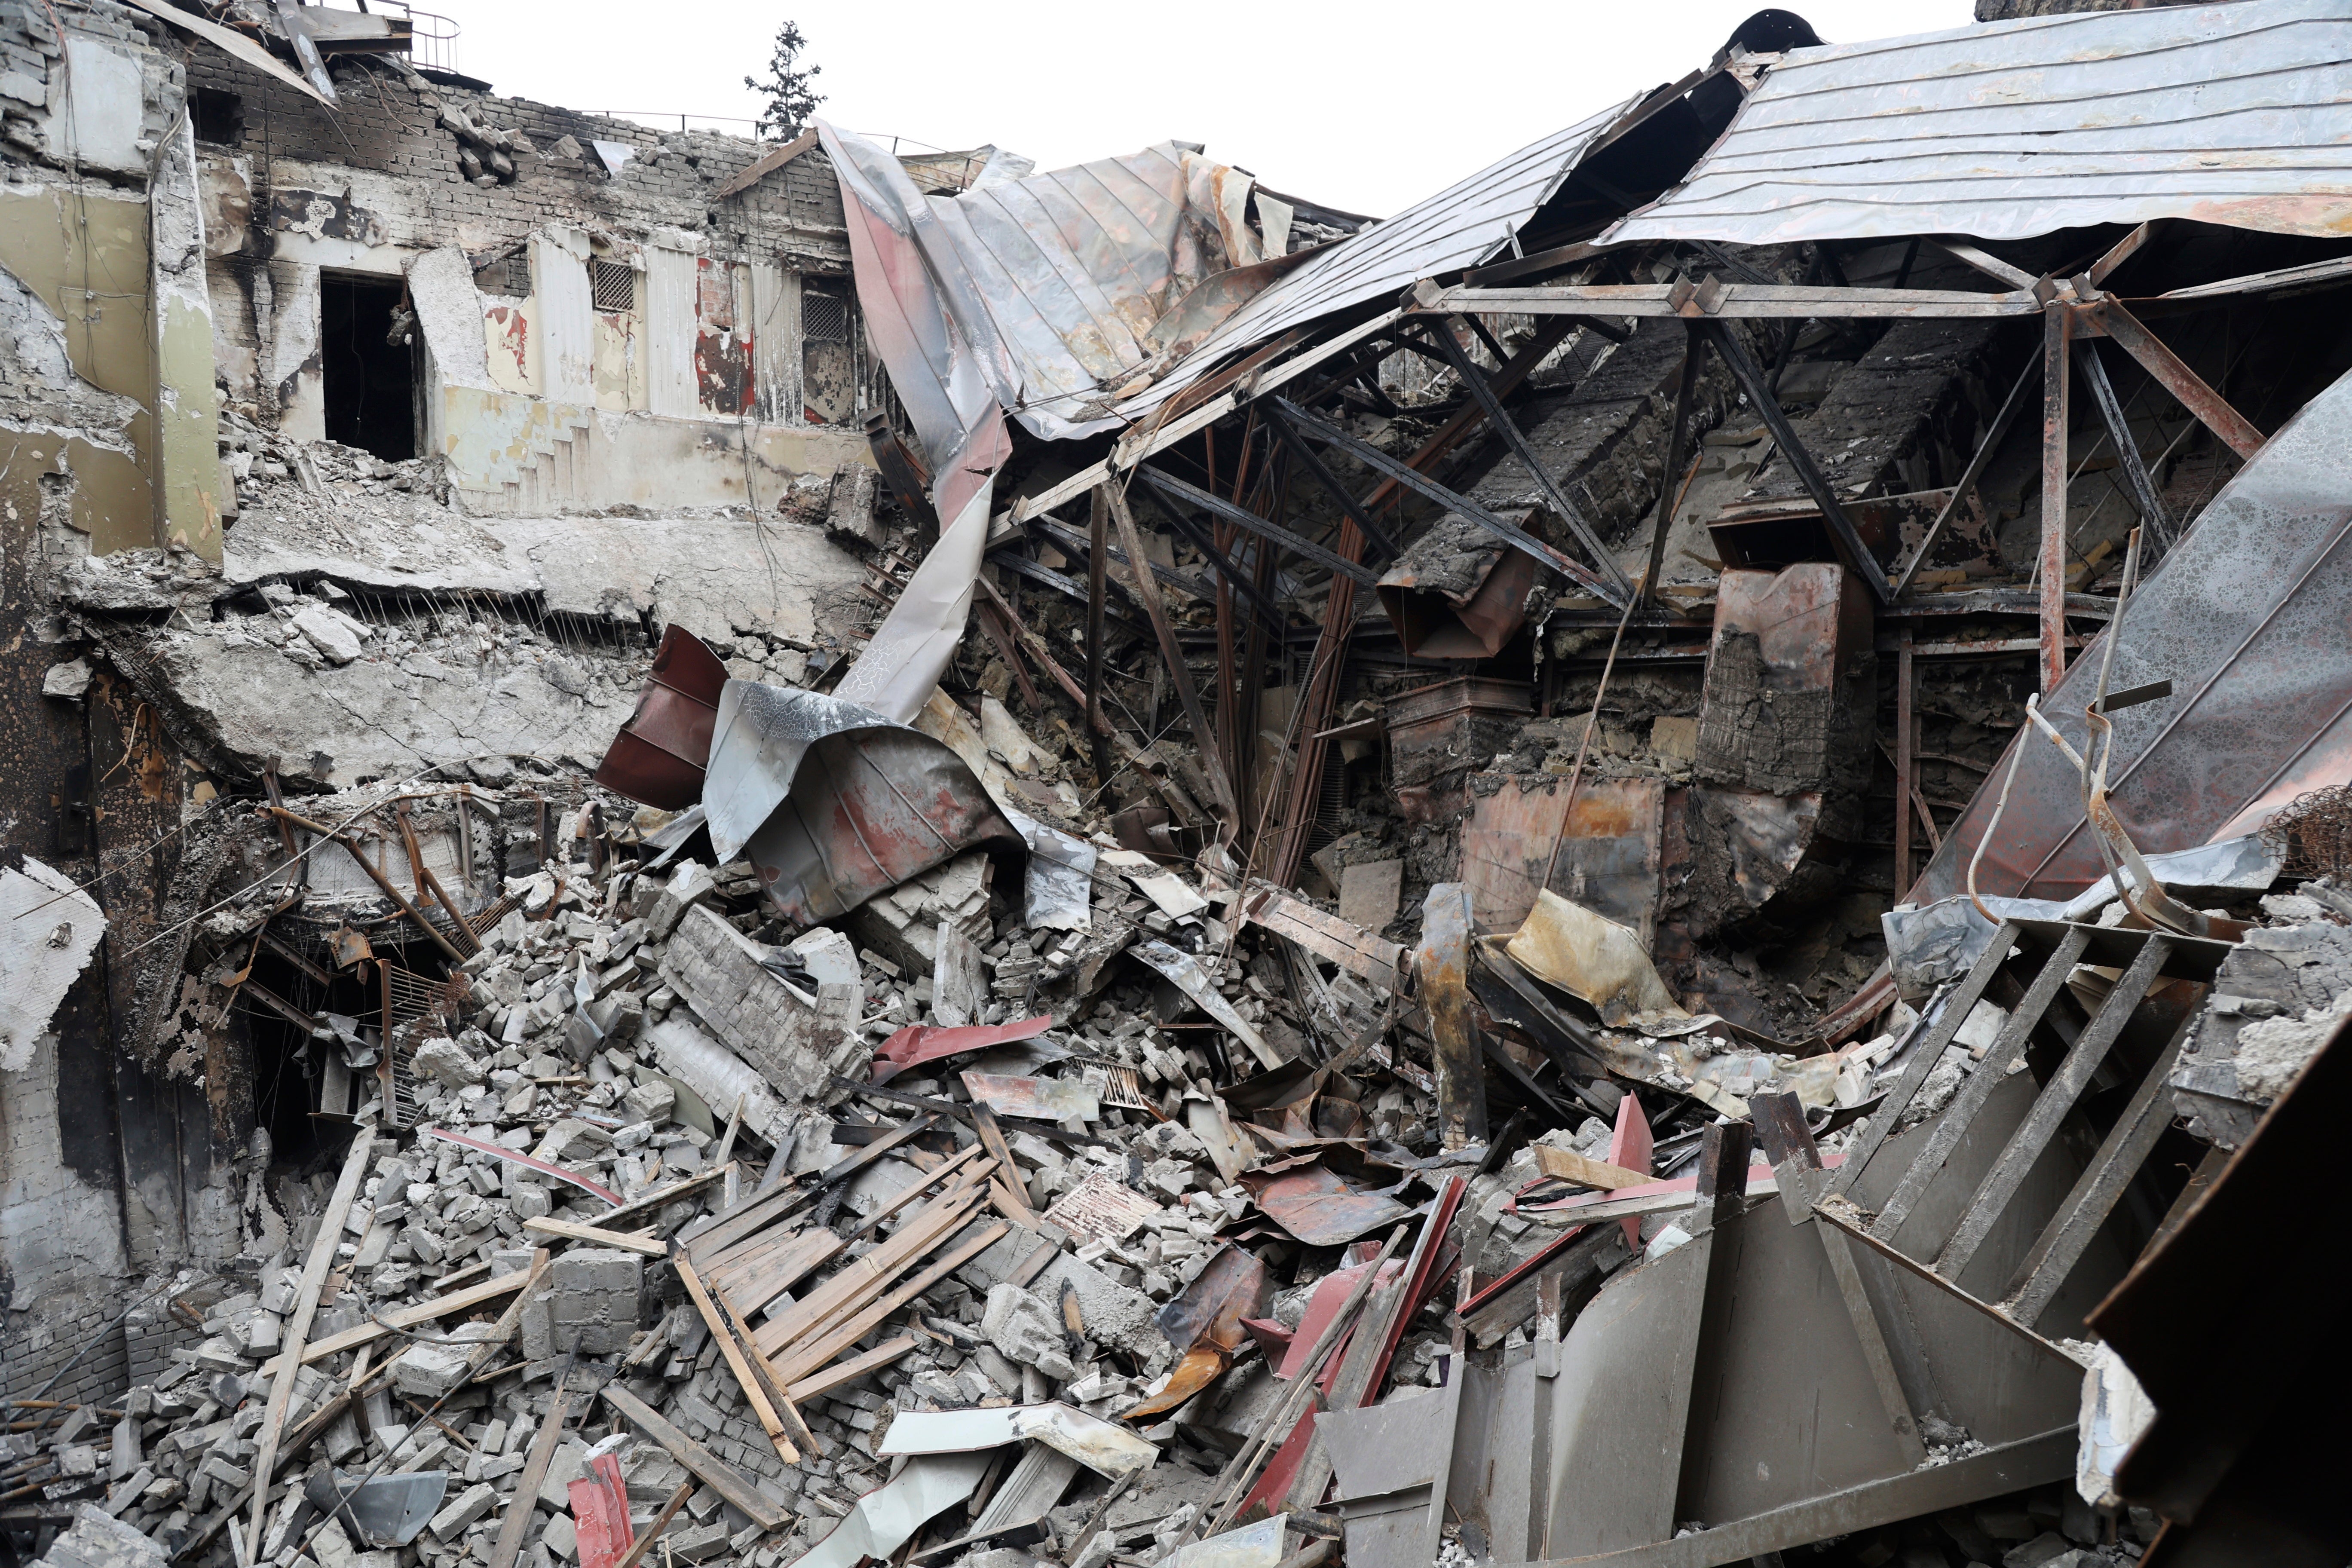 Amnesty International says at least 12 people died in the airstrike on Mariupol’s Drama Theatre on 16 March